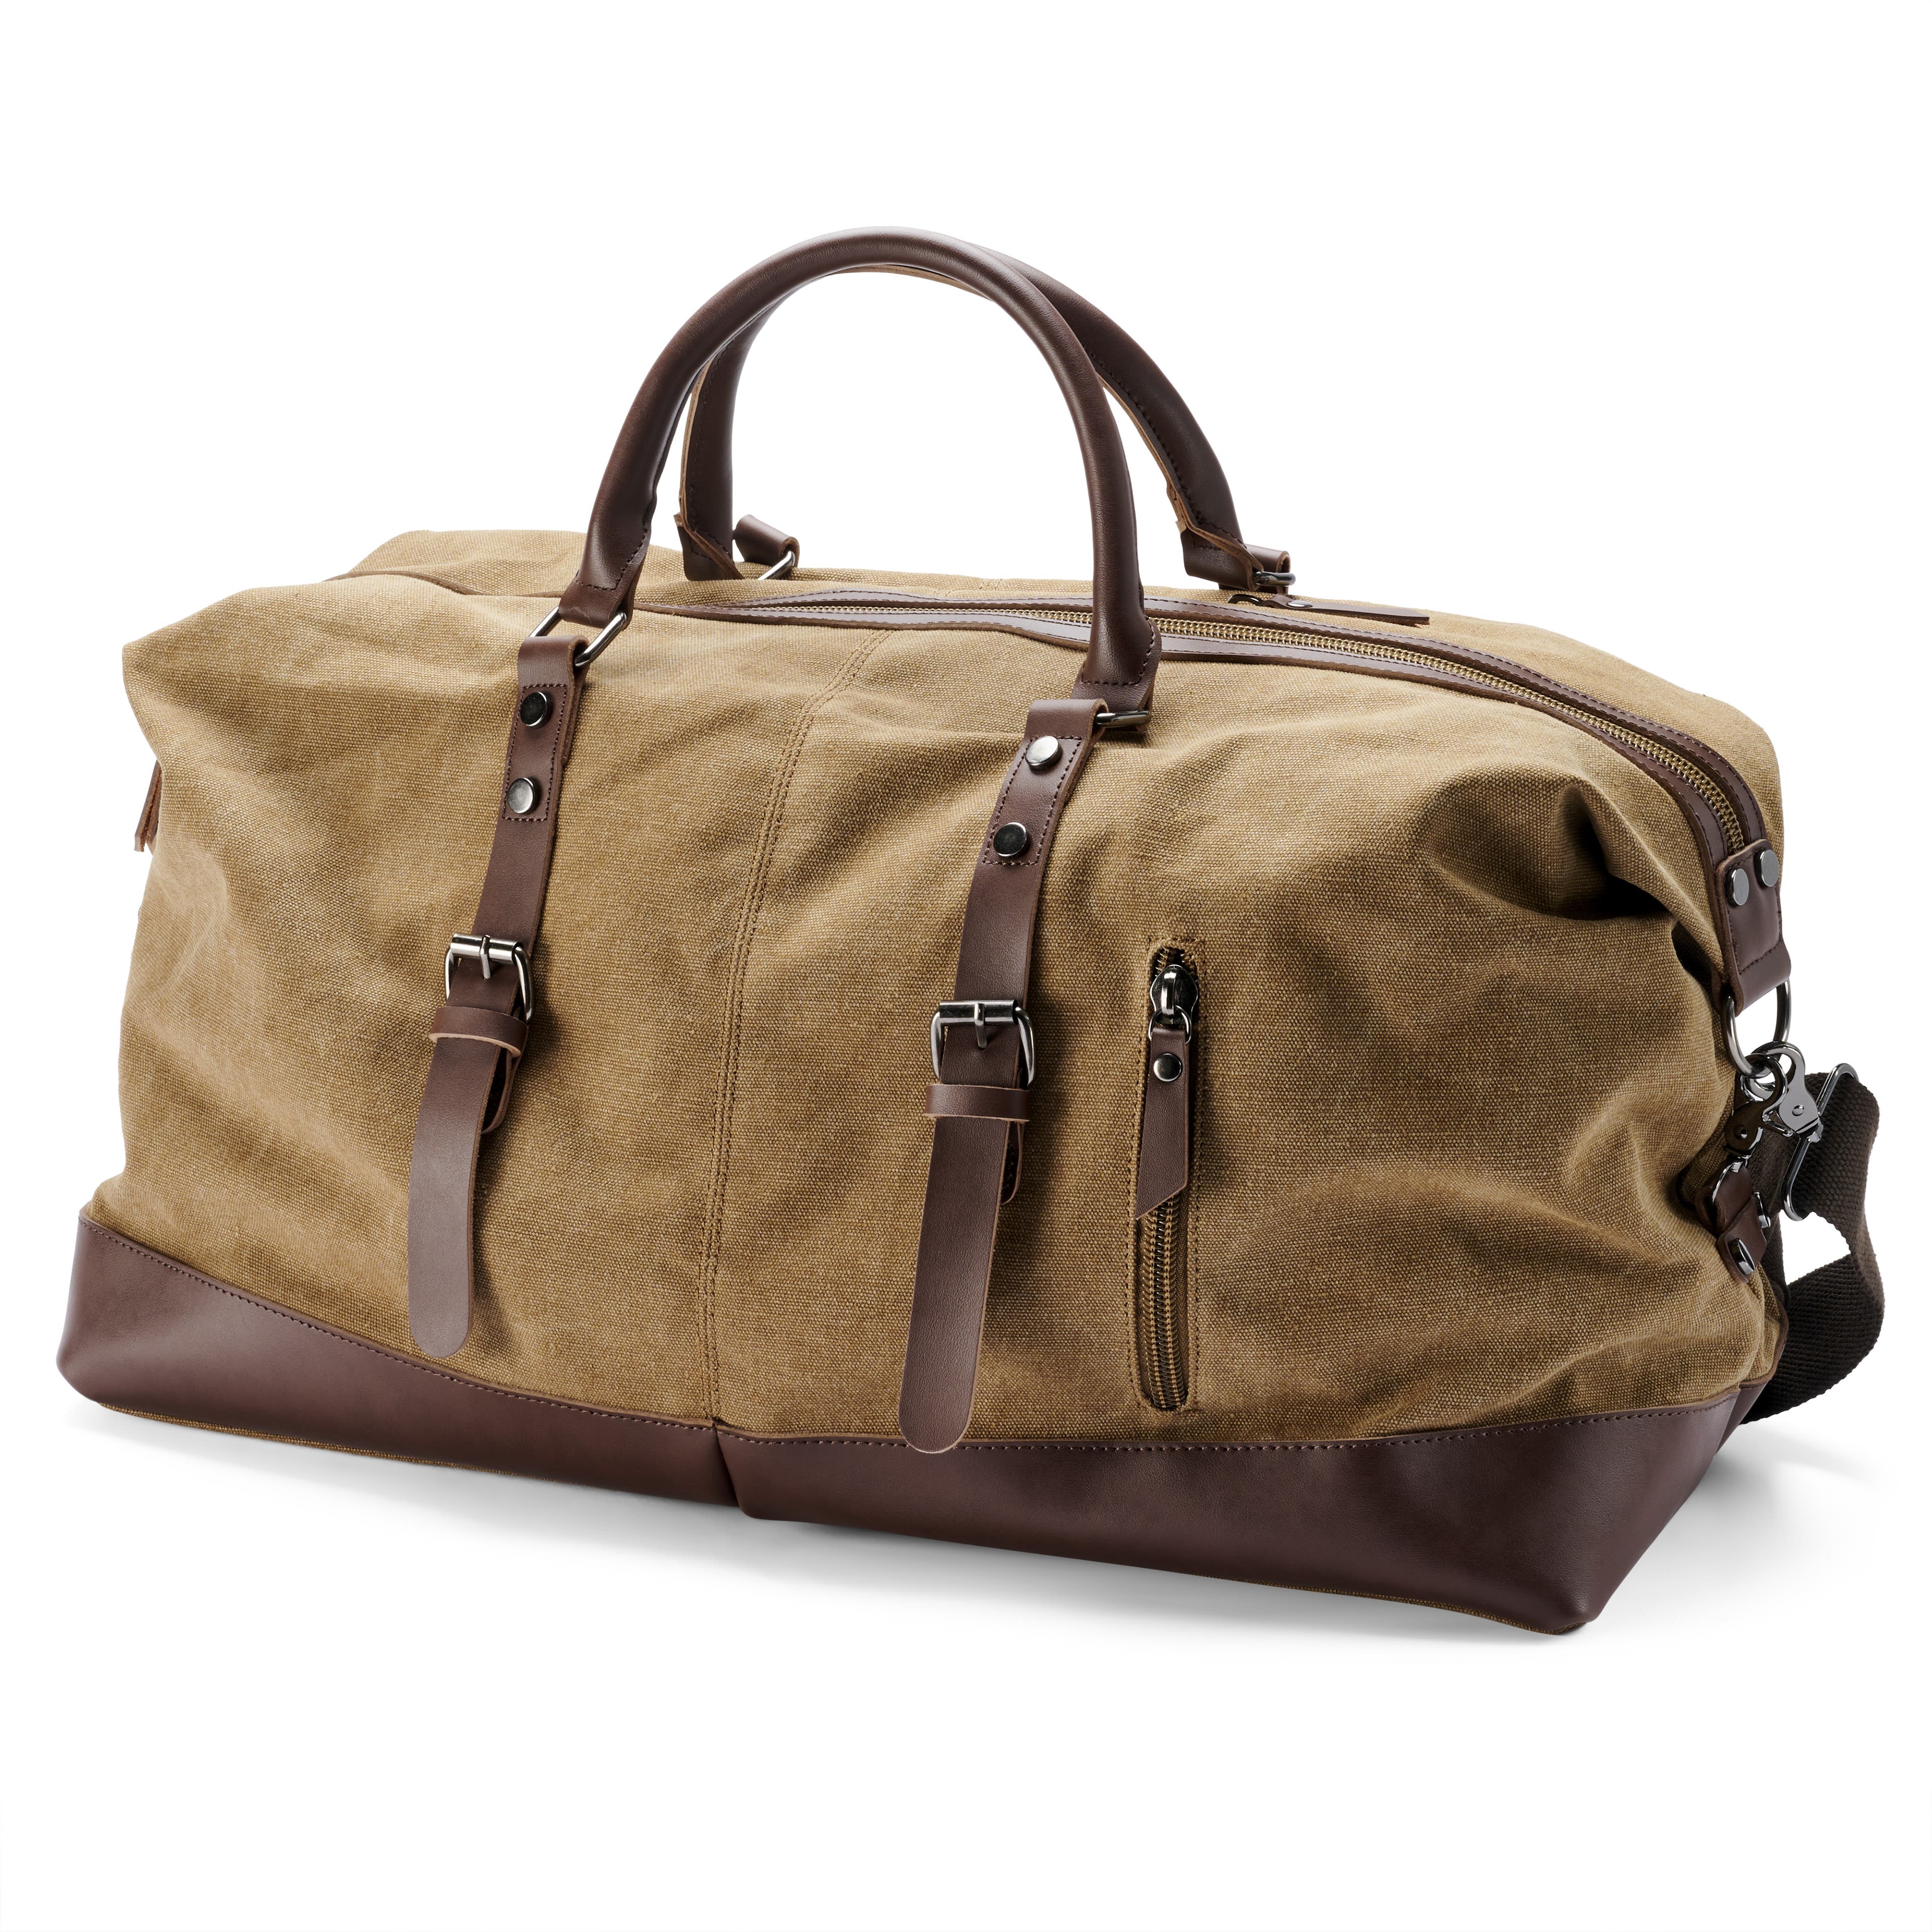 Canvas Vs Leather Duffel bags  Bags, Leather duffel bag, Leather duffle